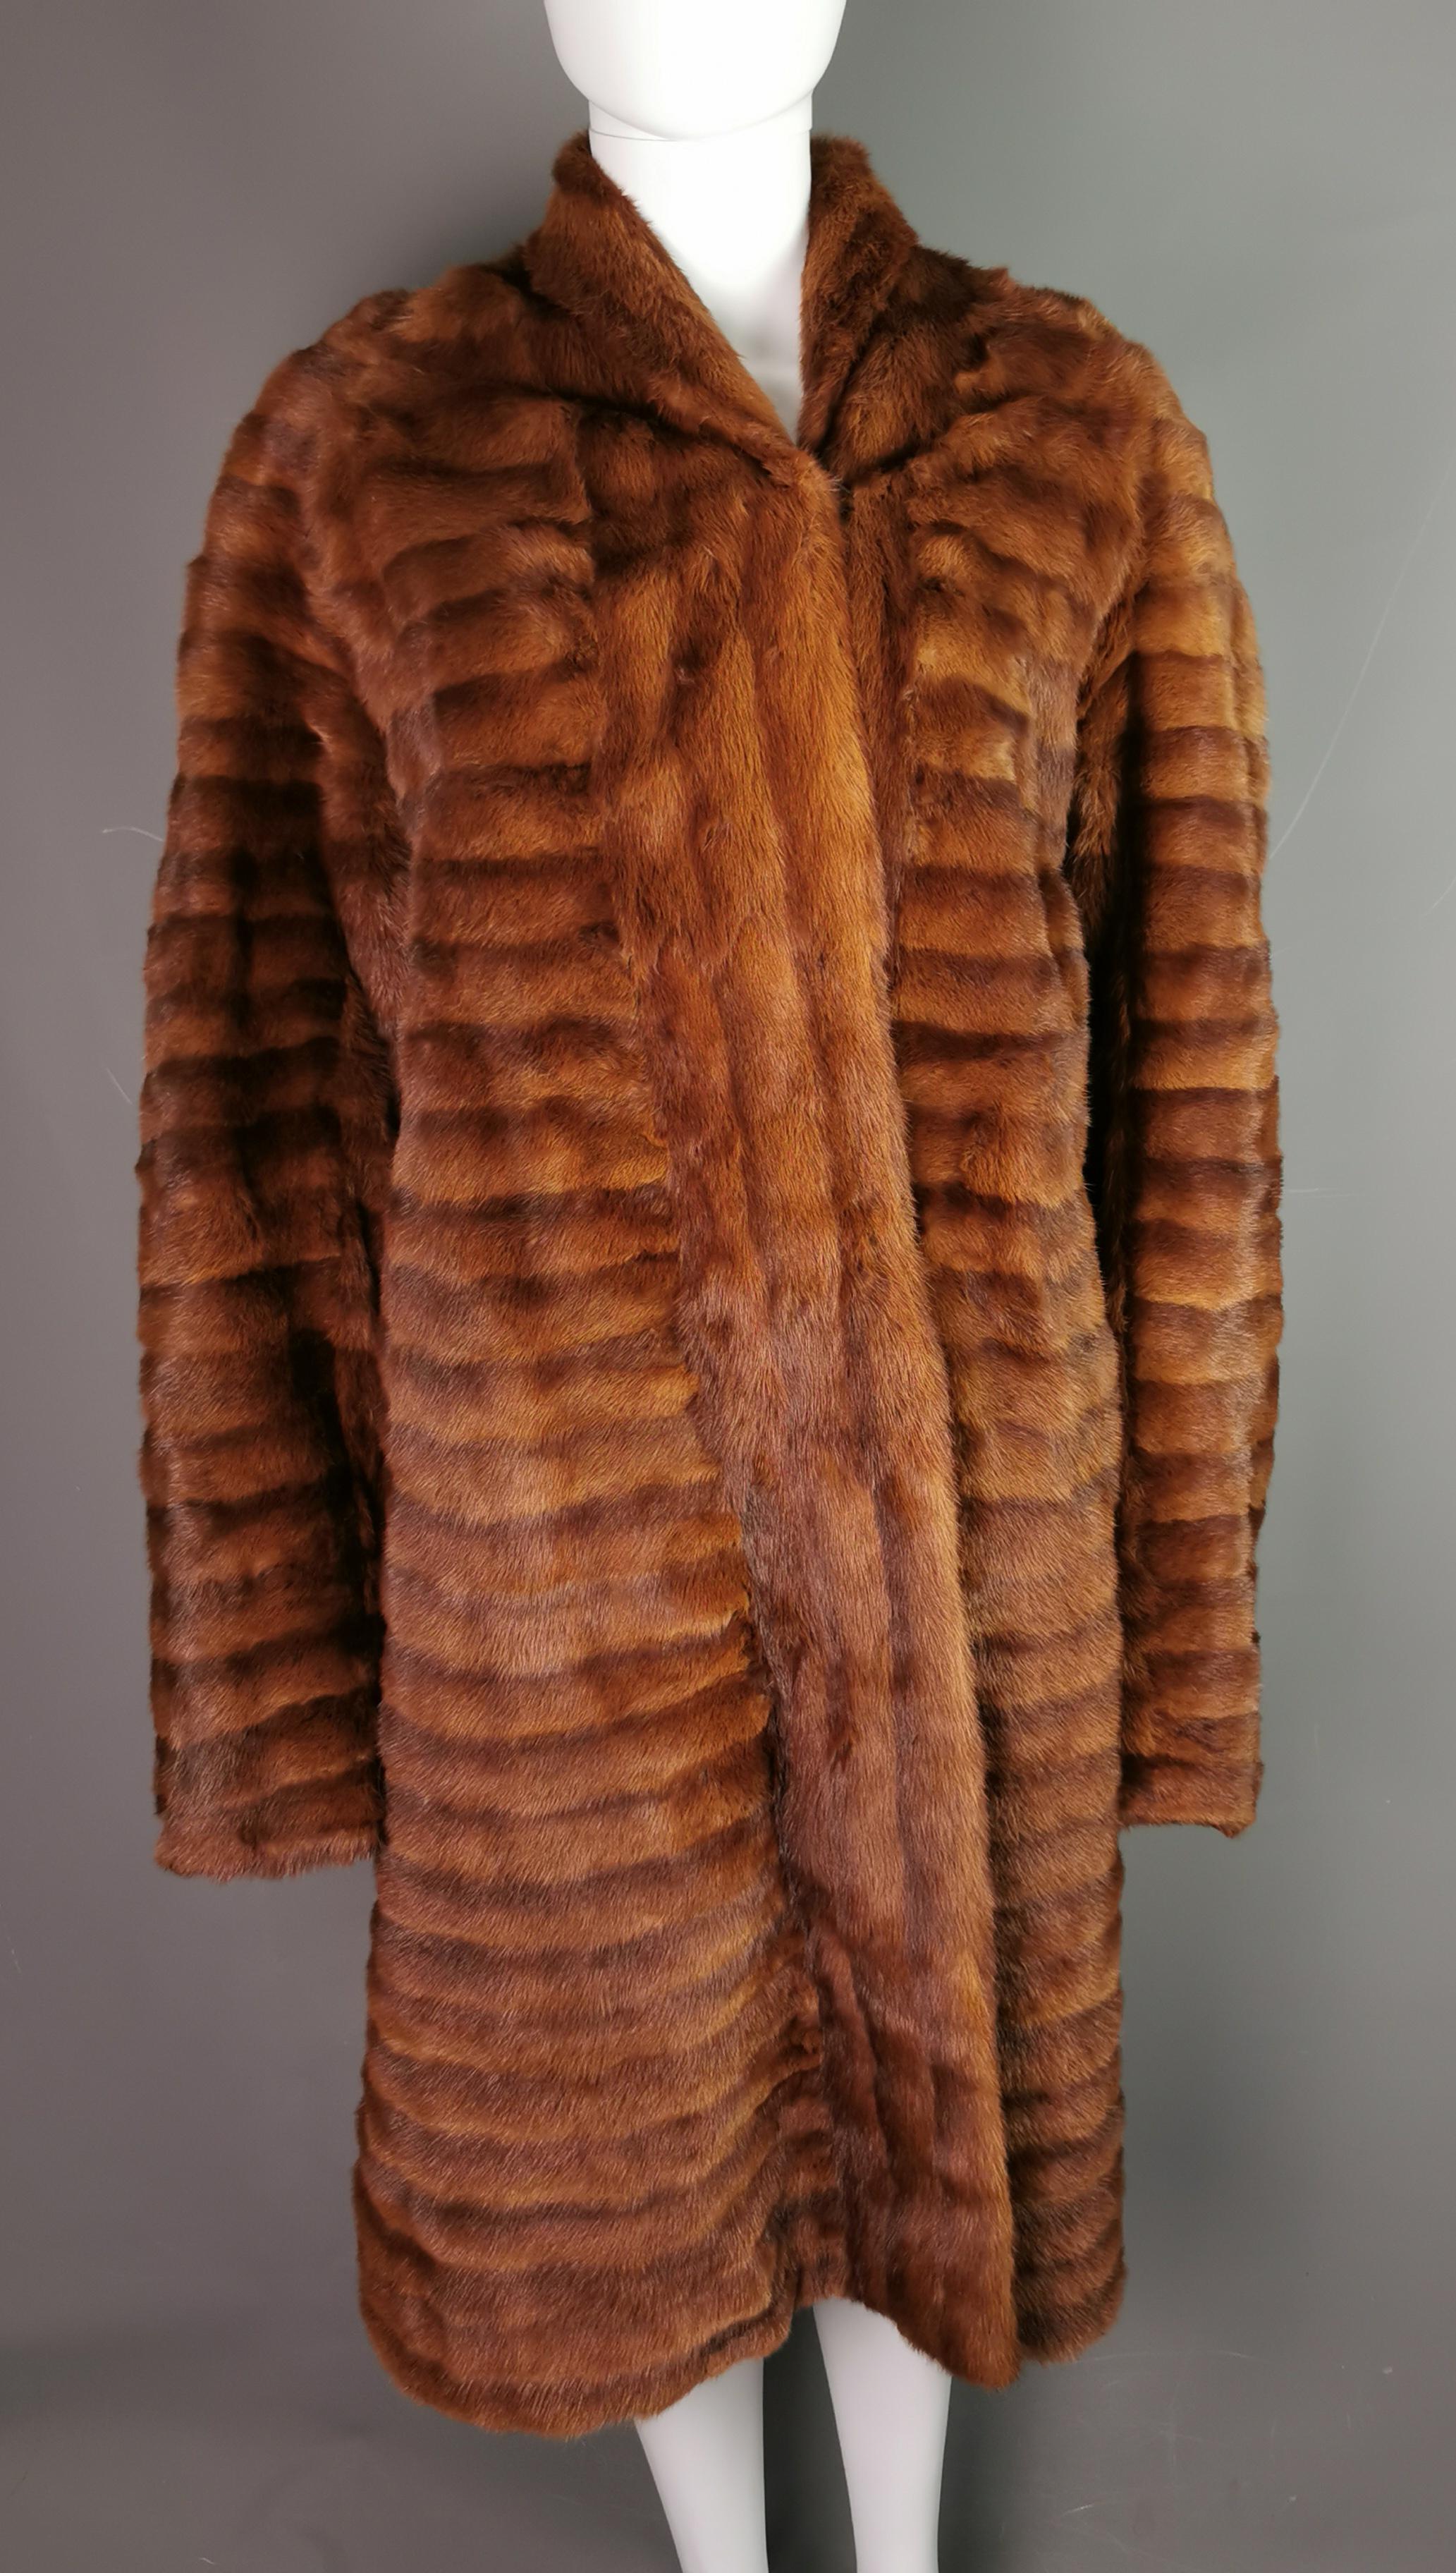 A vintage c1970s coney fur coat.

It is a reddish brown colour, long length with slim sleek pelts.

The coat has a short collar, wrap over style fastening which fastens with fabric covered metal hooks.

The coat has pockets and is lined in a toffee